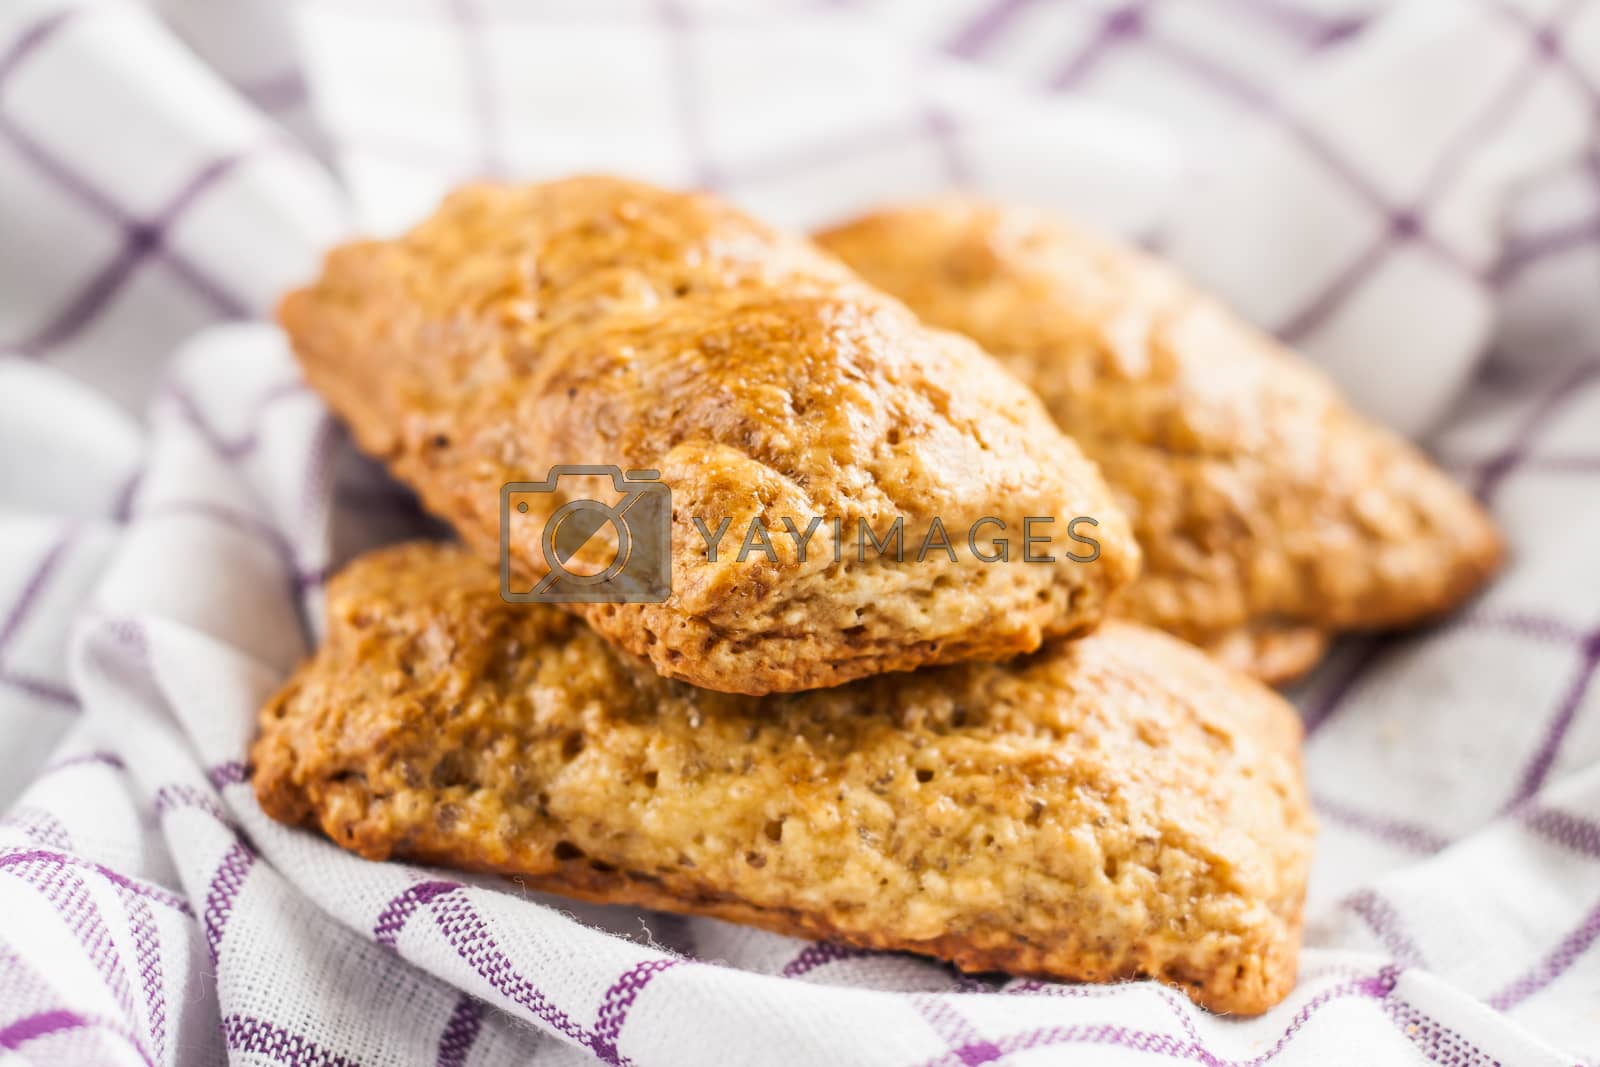 Royalty free image of baked pastry stuffed with chocolate lying on a napkin by Tanacha